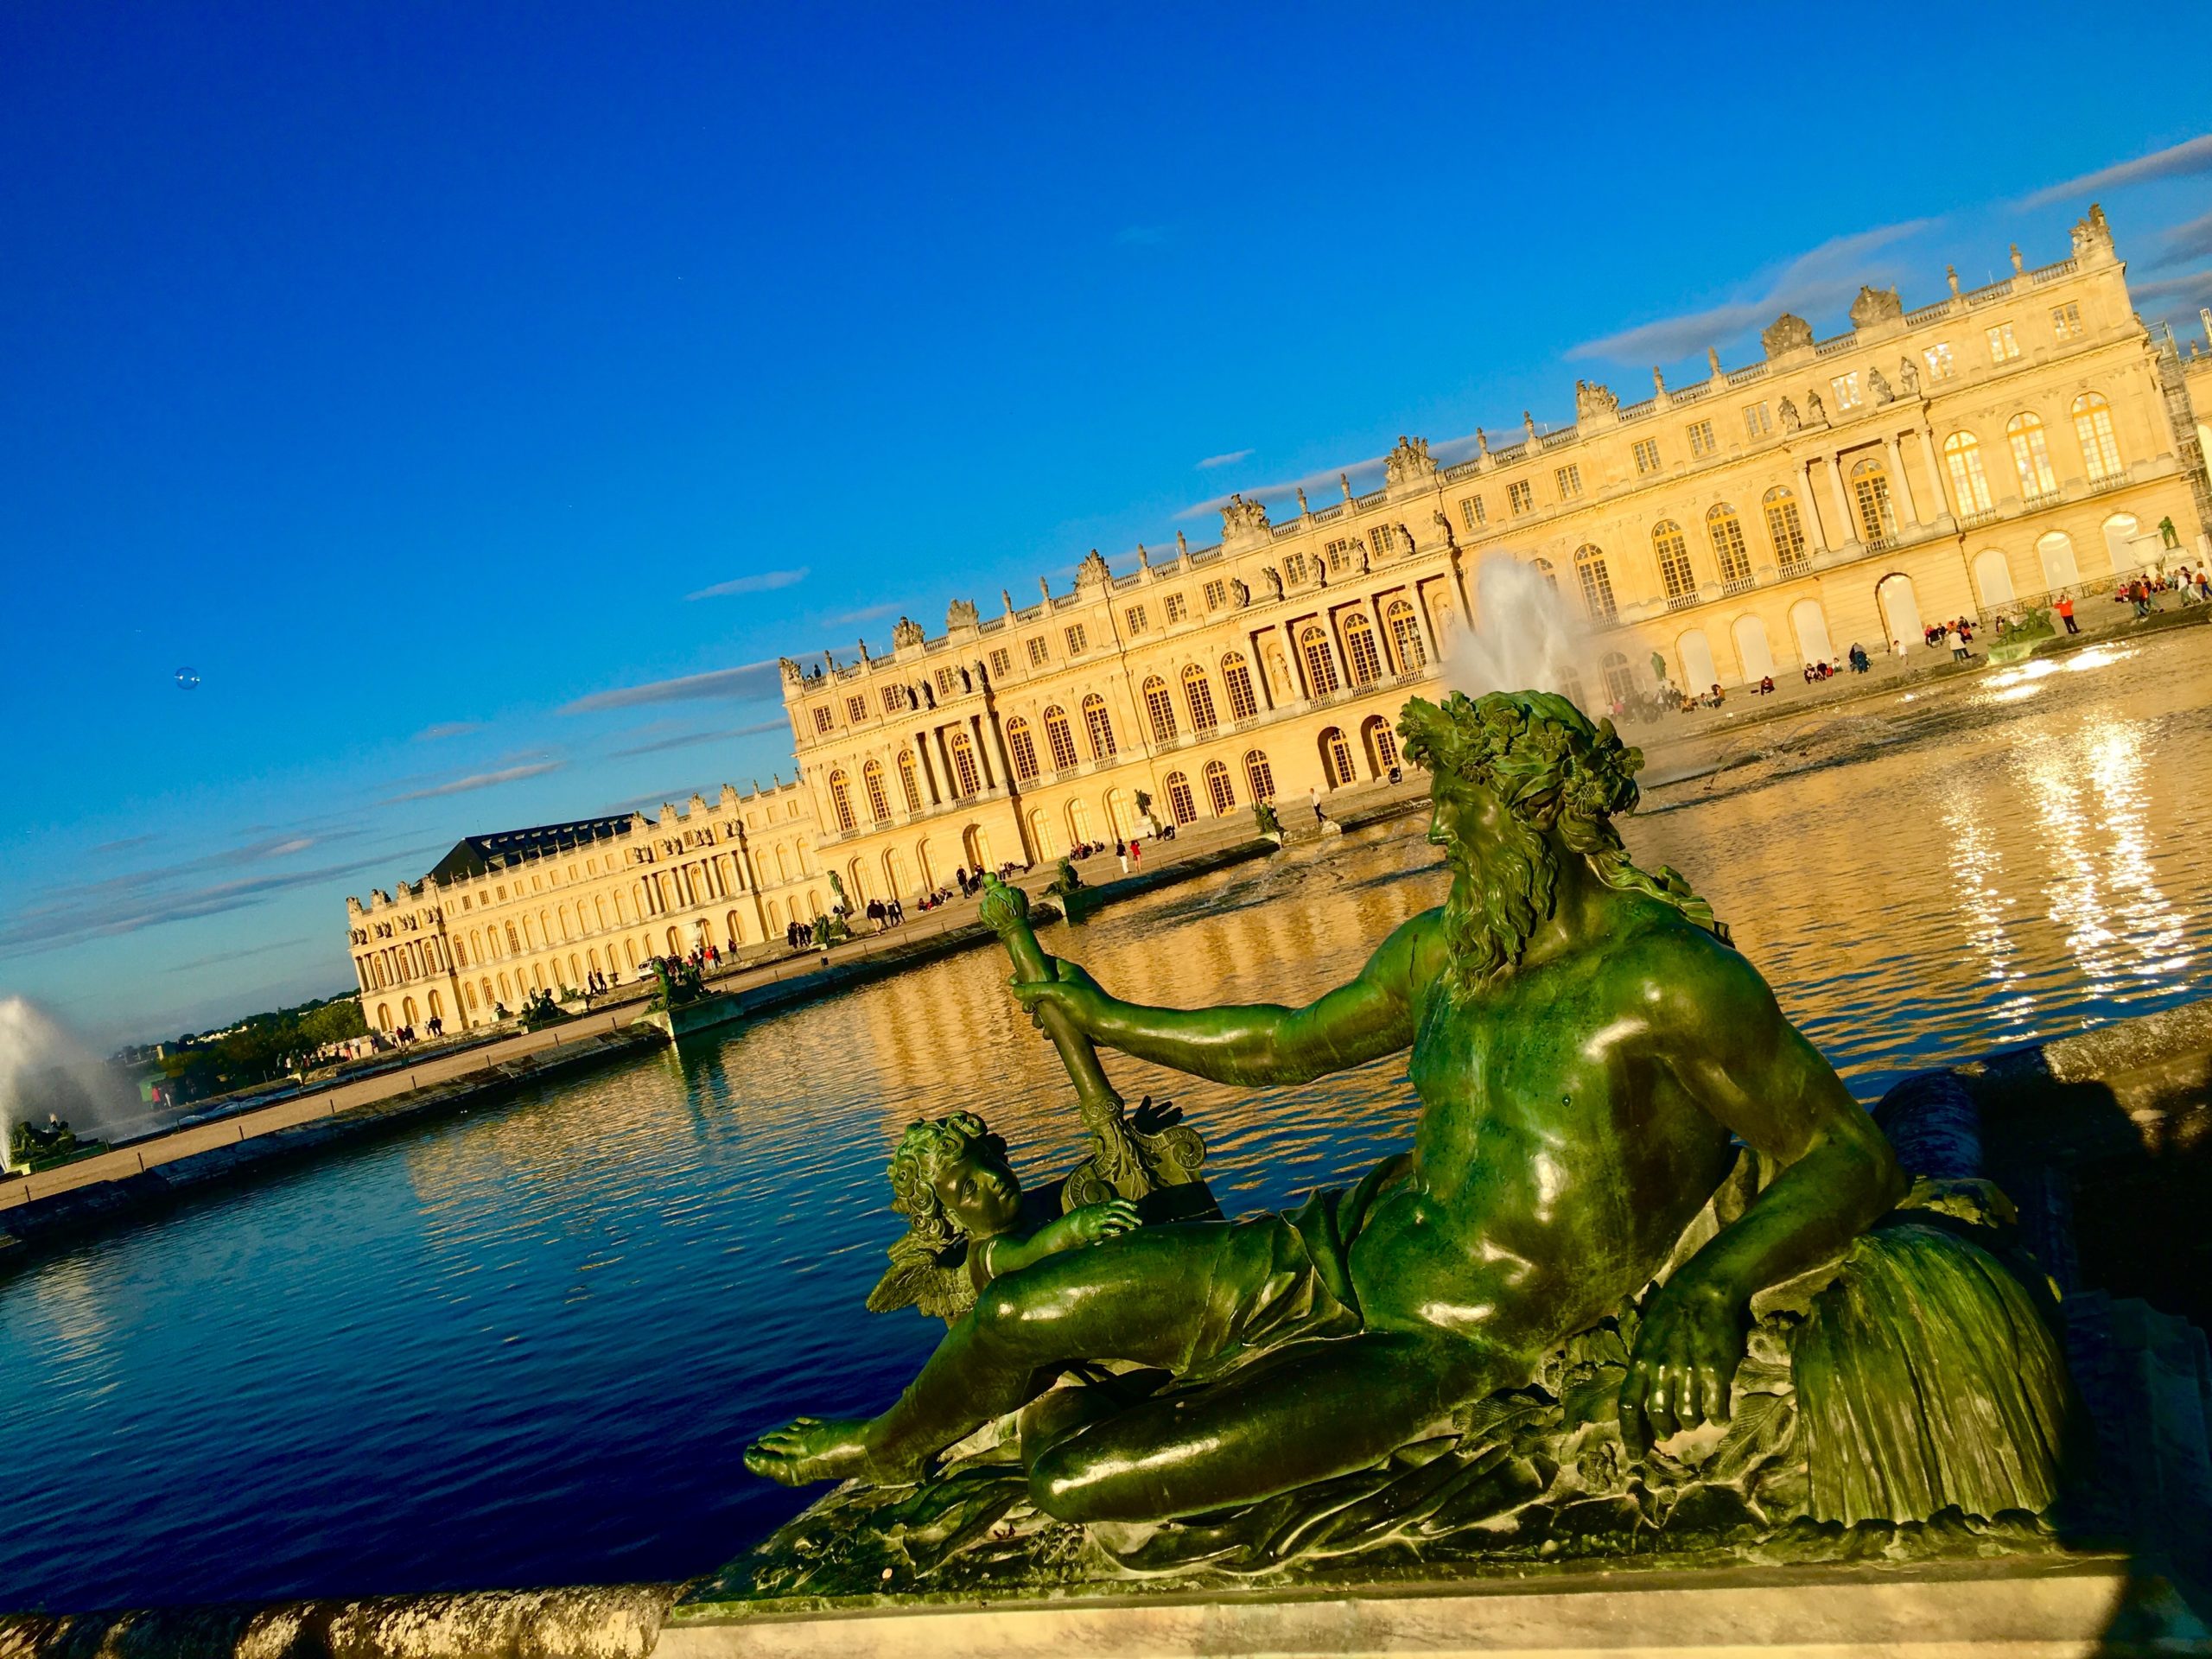 Statues in the garden of the palace of versailles at sunset